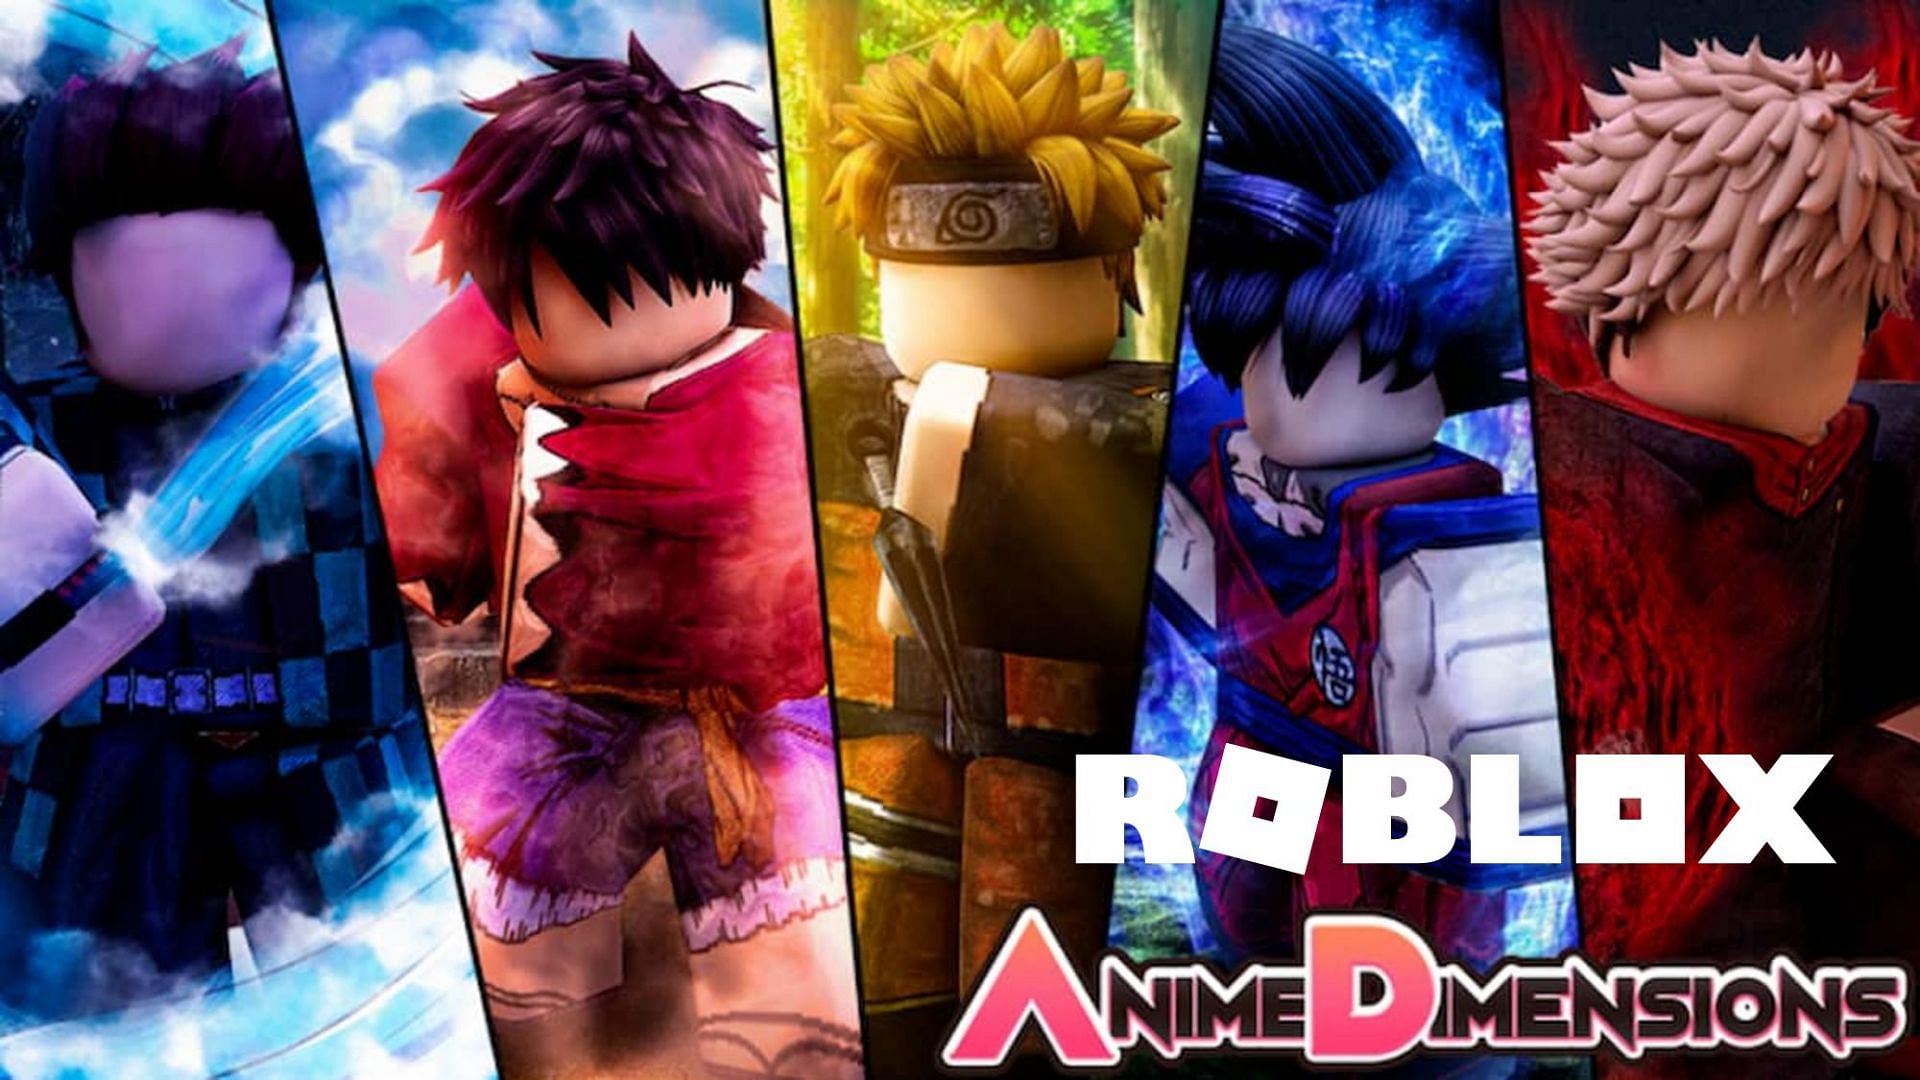 Anime Dimensions Simulator codes to get free gems, boosts & more